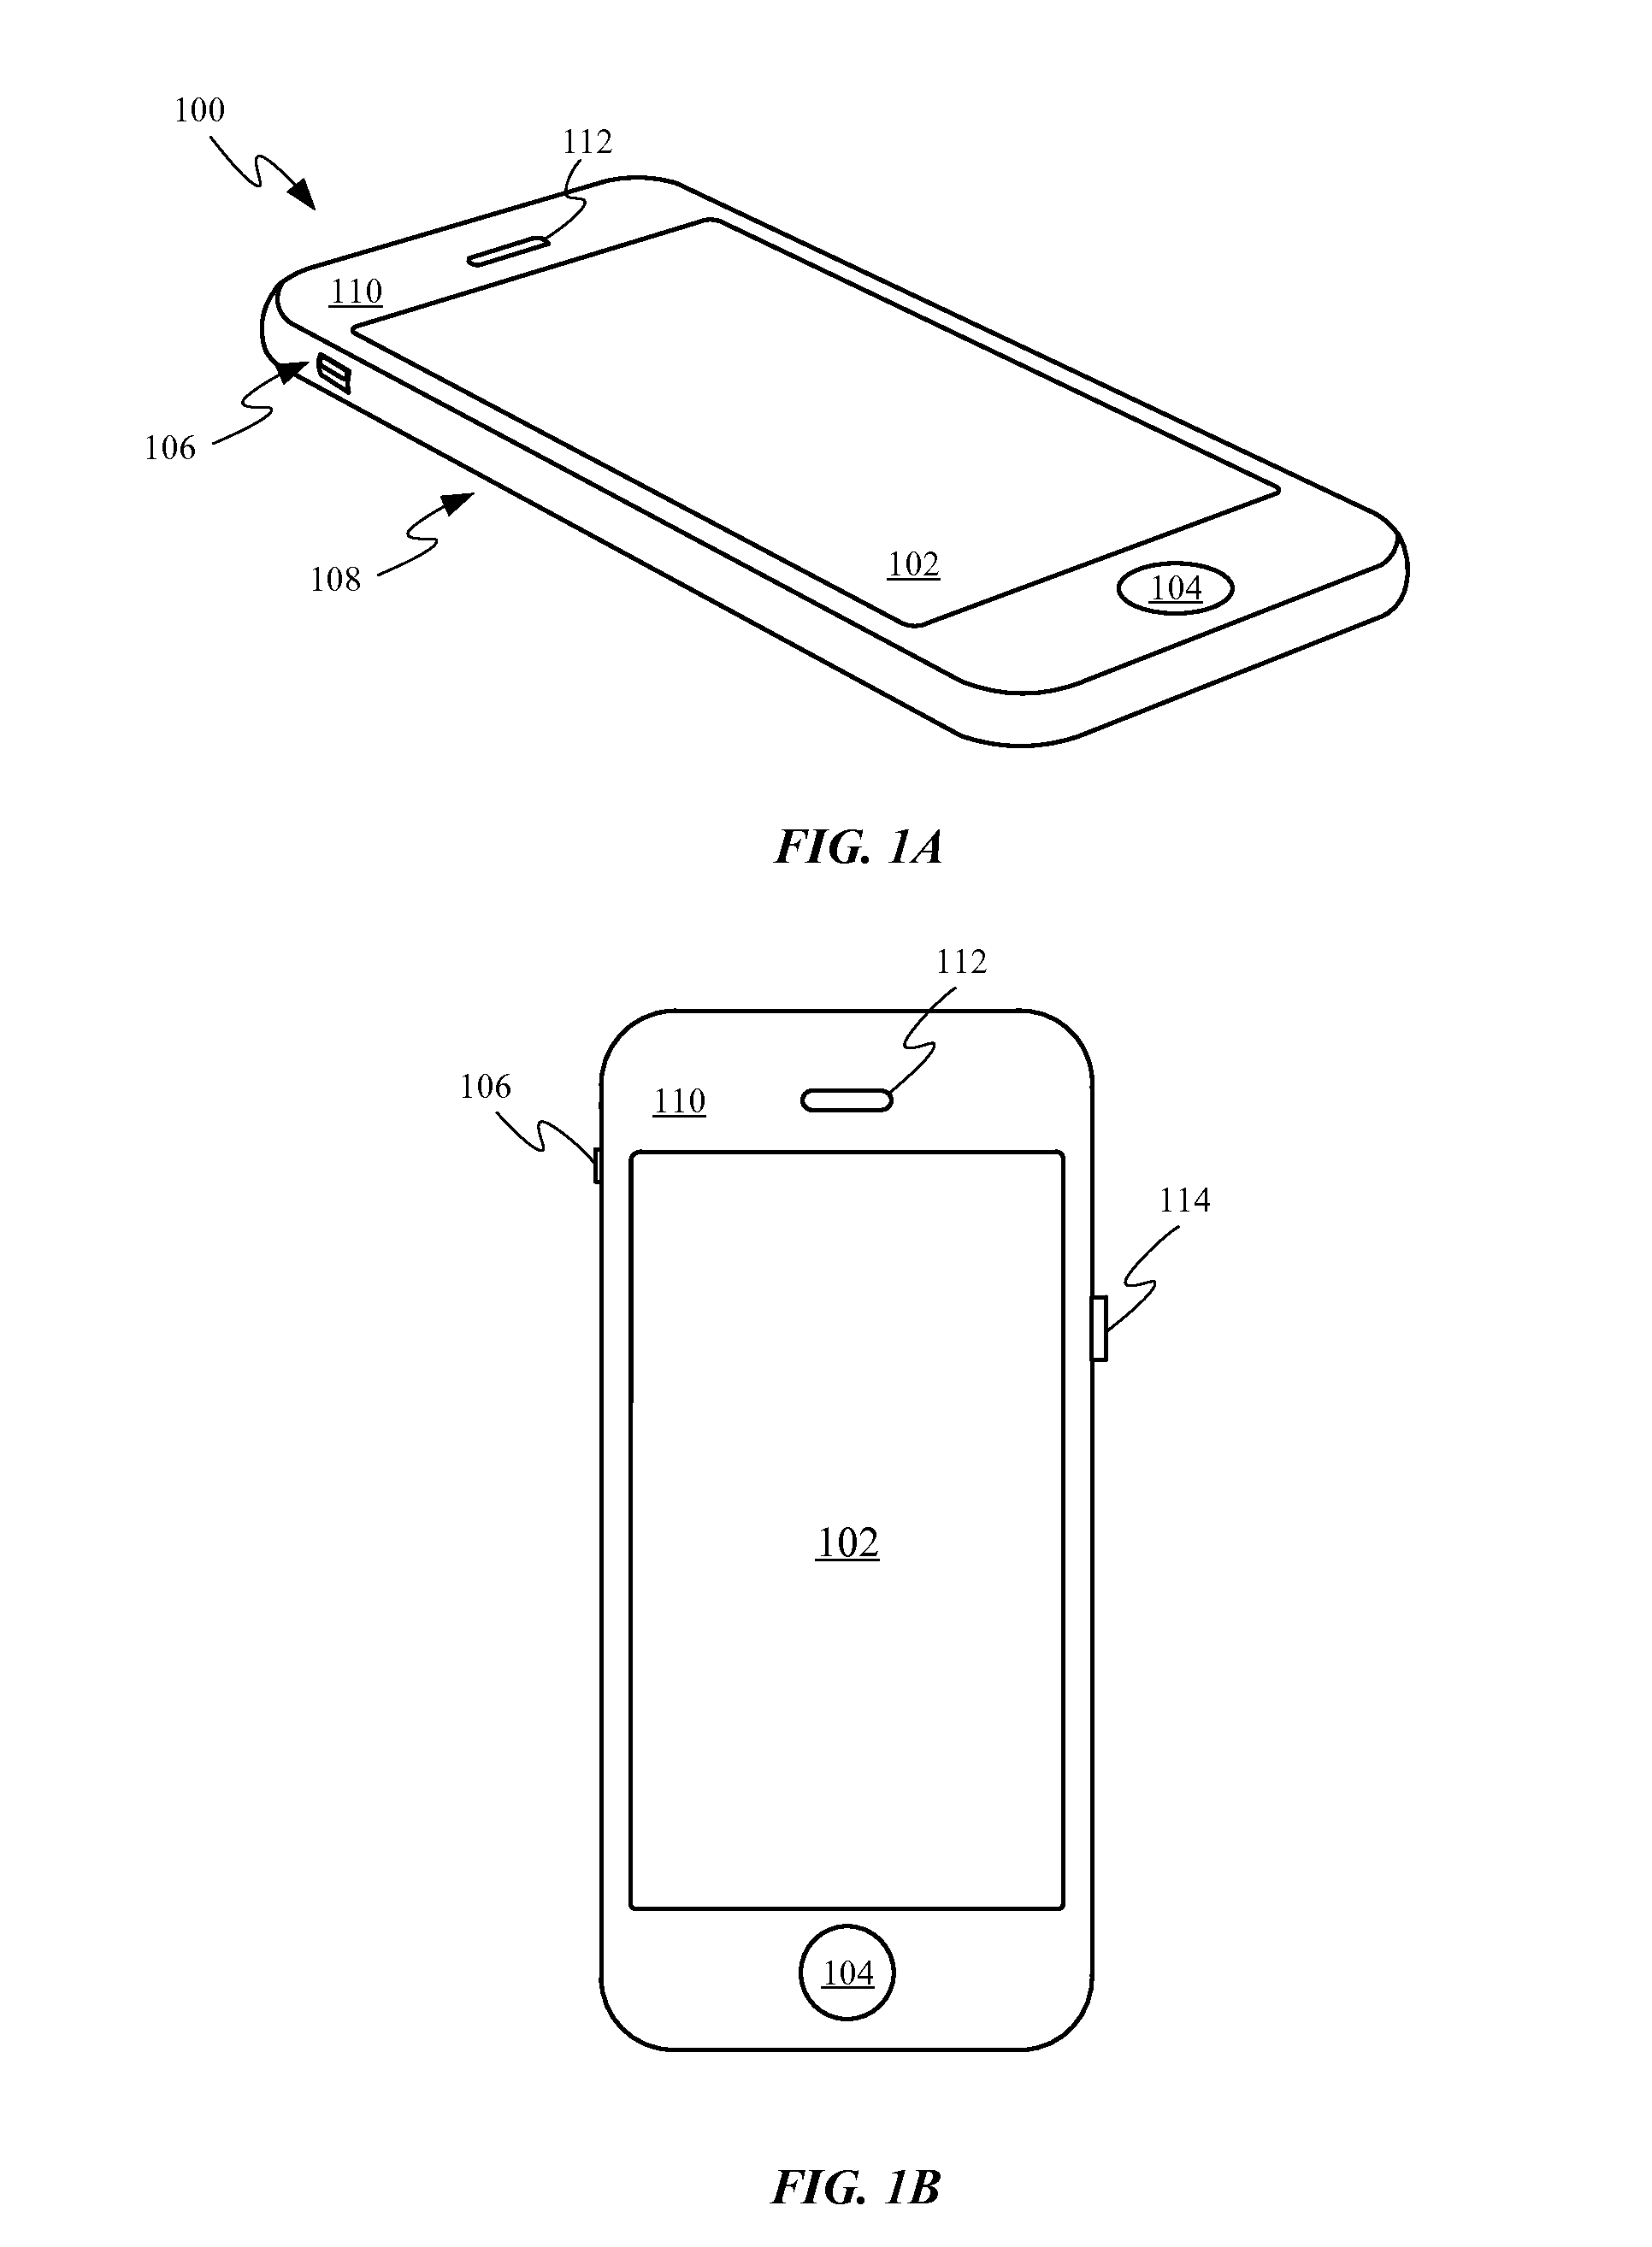 Button integration for an electronic device